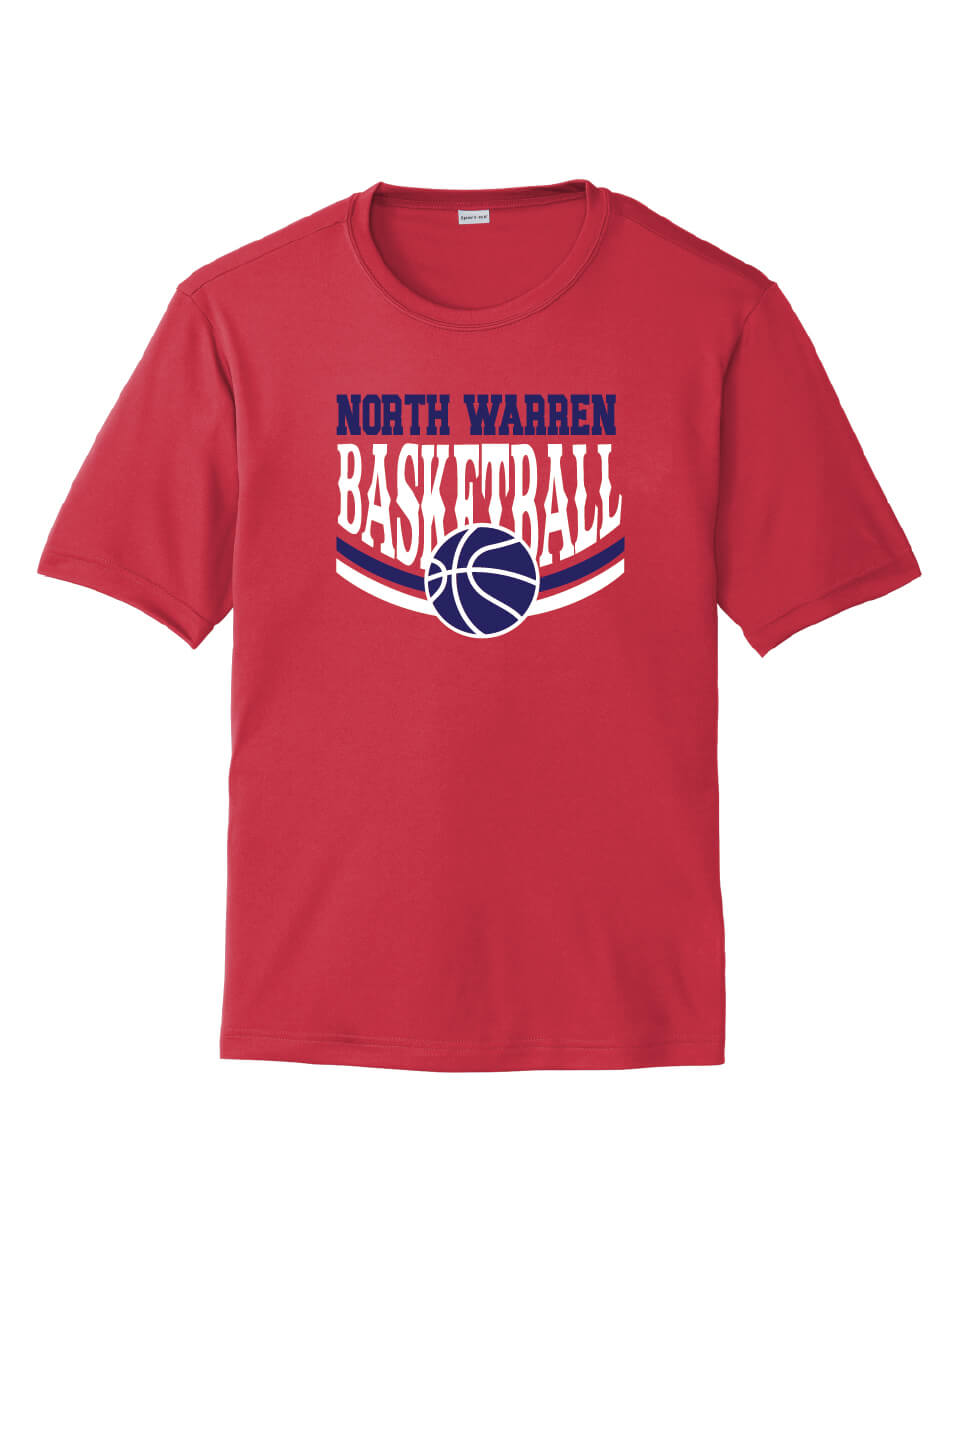 NW Basketball Sport Tek Competitor Short Sleeve Tee (Youth) red